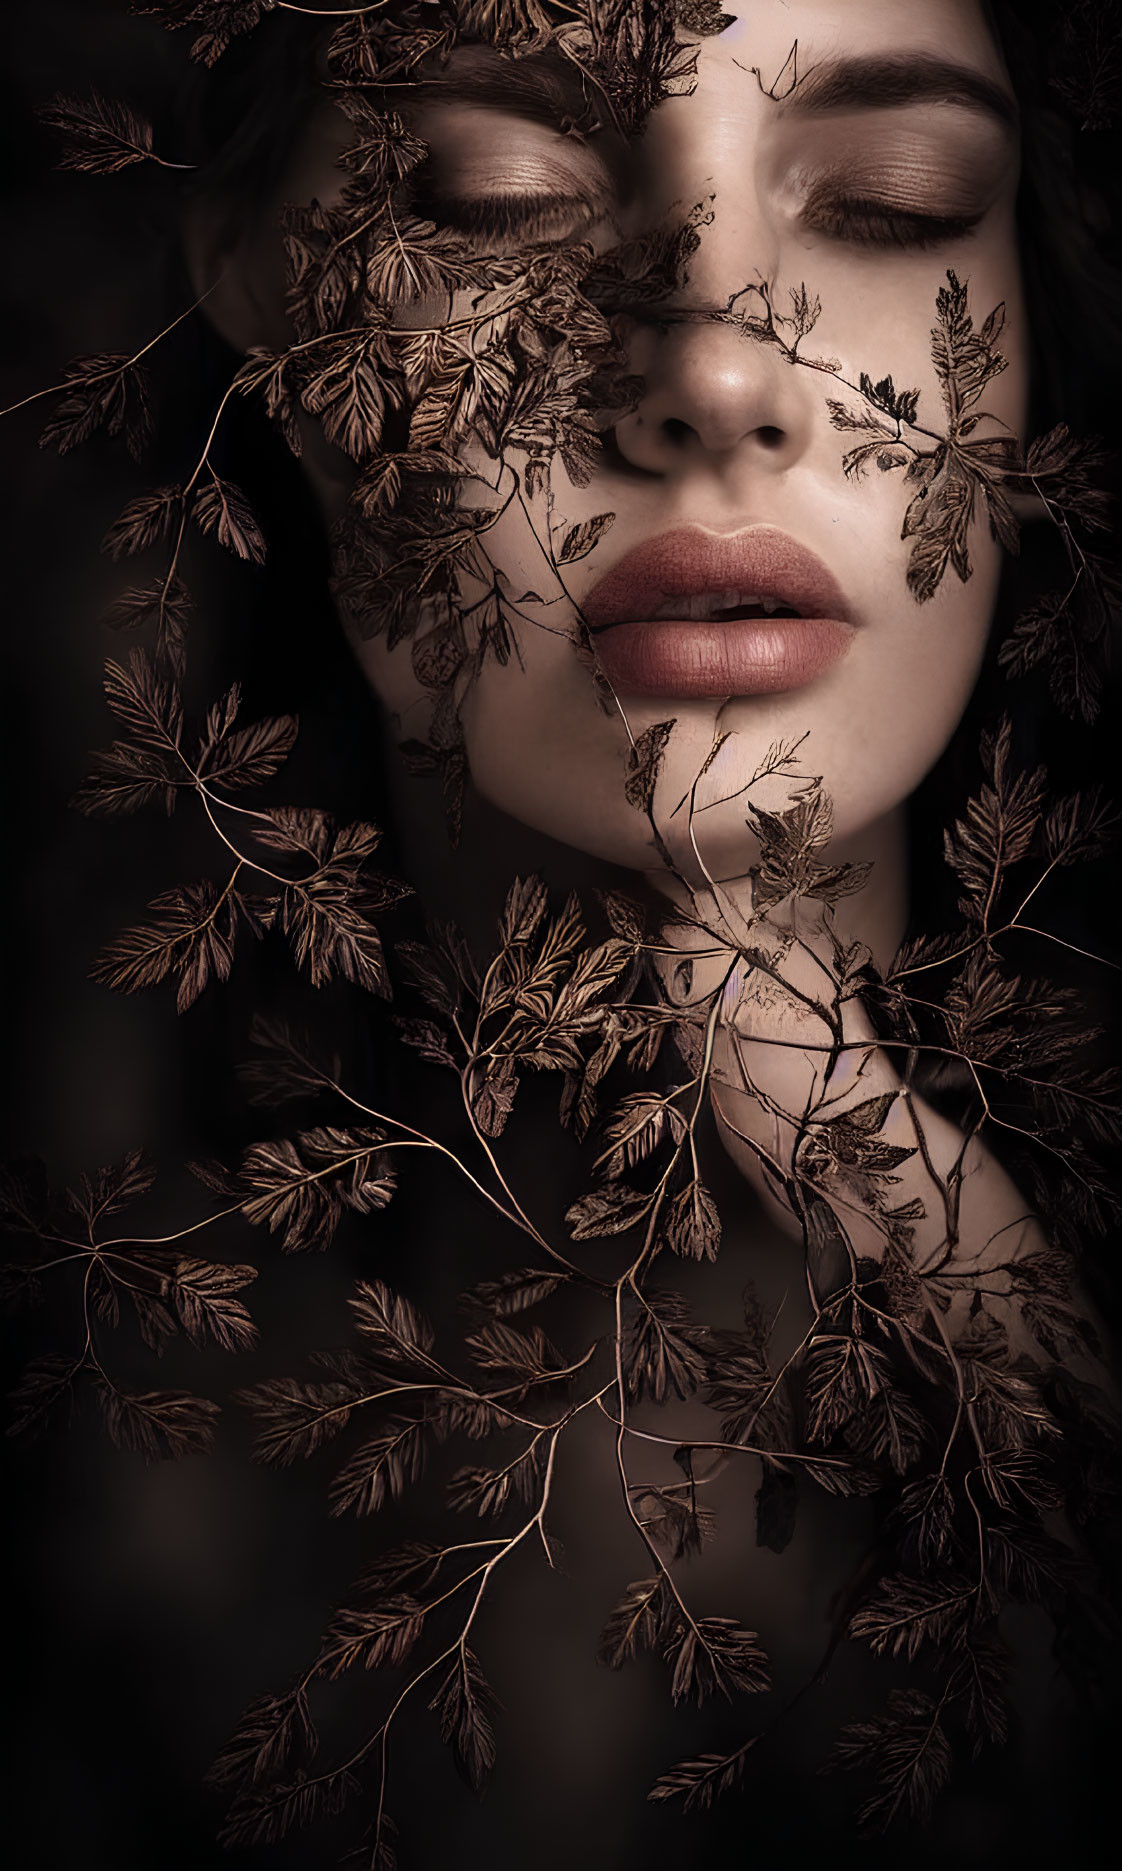 Close-up portrait of woman with face obscured by dark fern leaves.